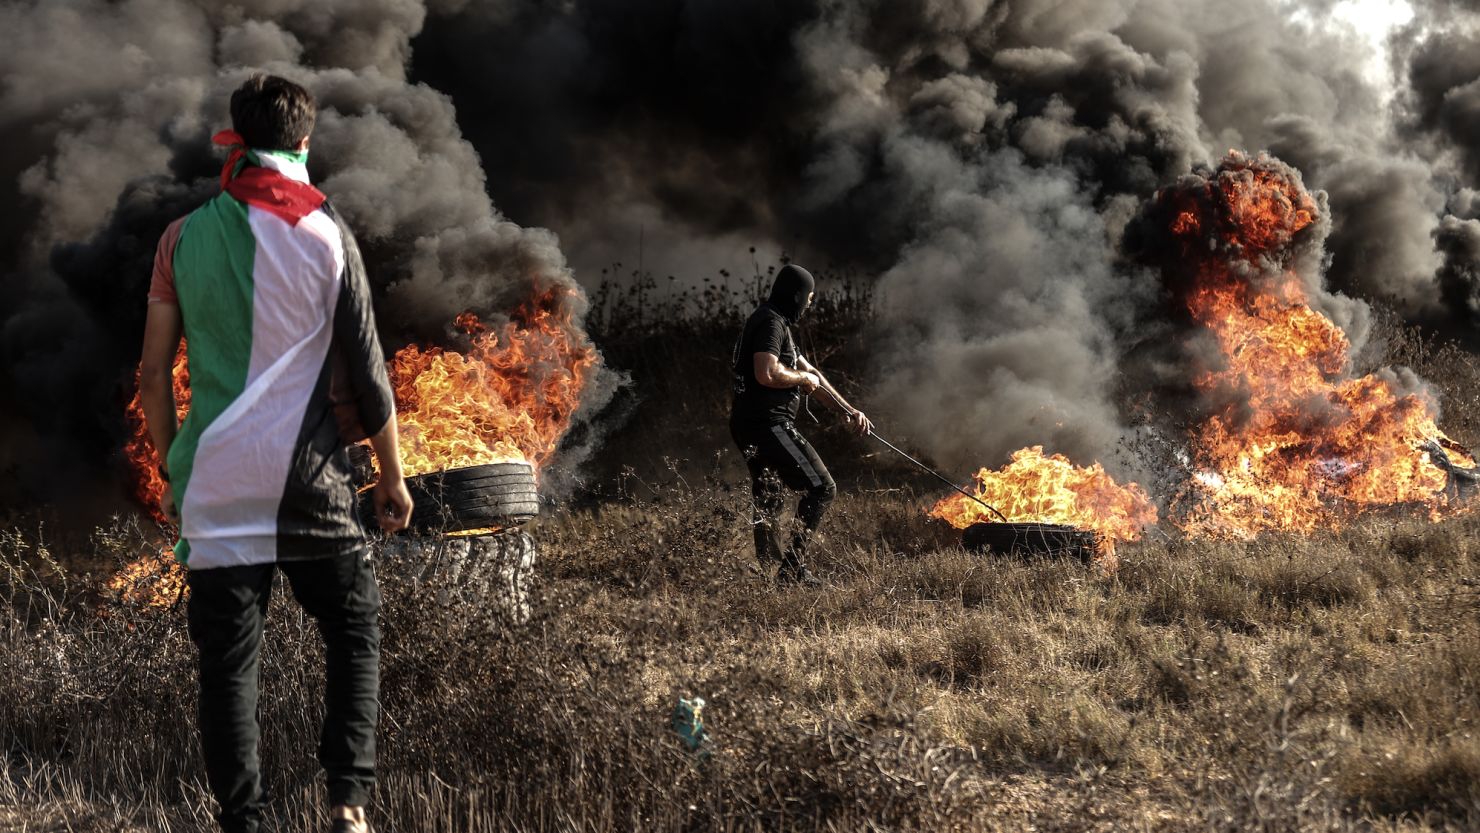 Palestinians set tires on fire during a demonstration against what they say are Israeli 'violations' in Jerusalem at the Al Aqsa Mosque on September 22.